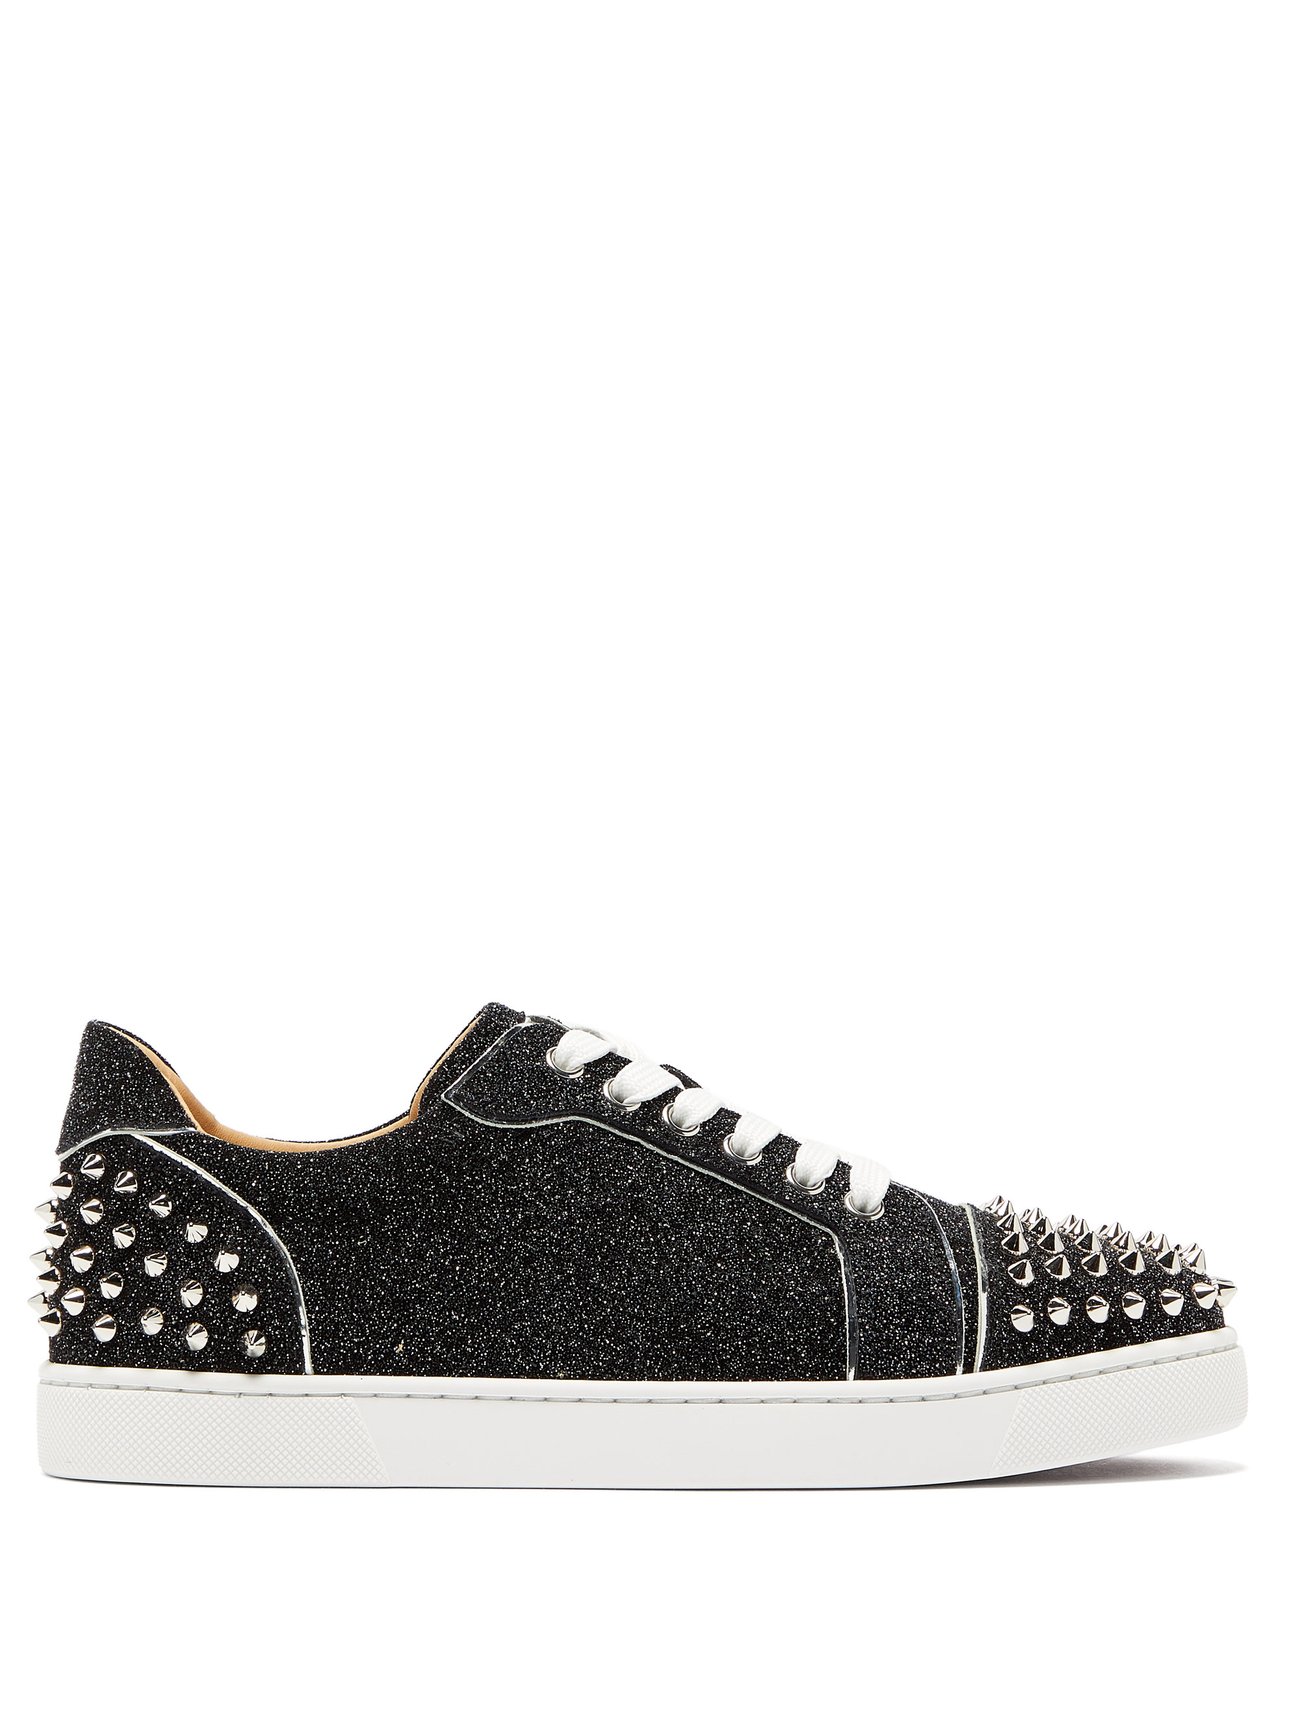 Vieira 2 spiked glittered-leather trainers